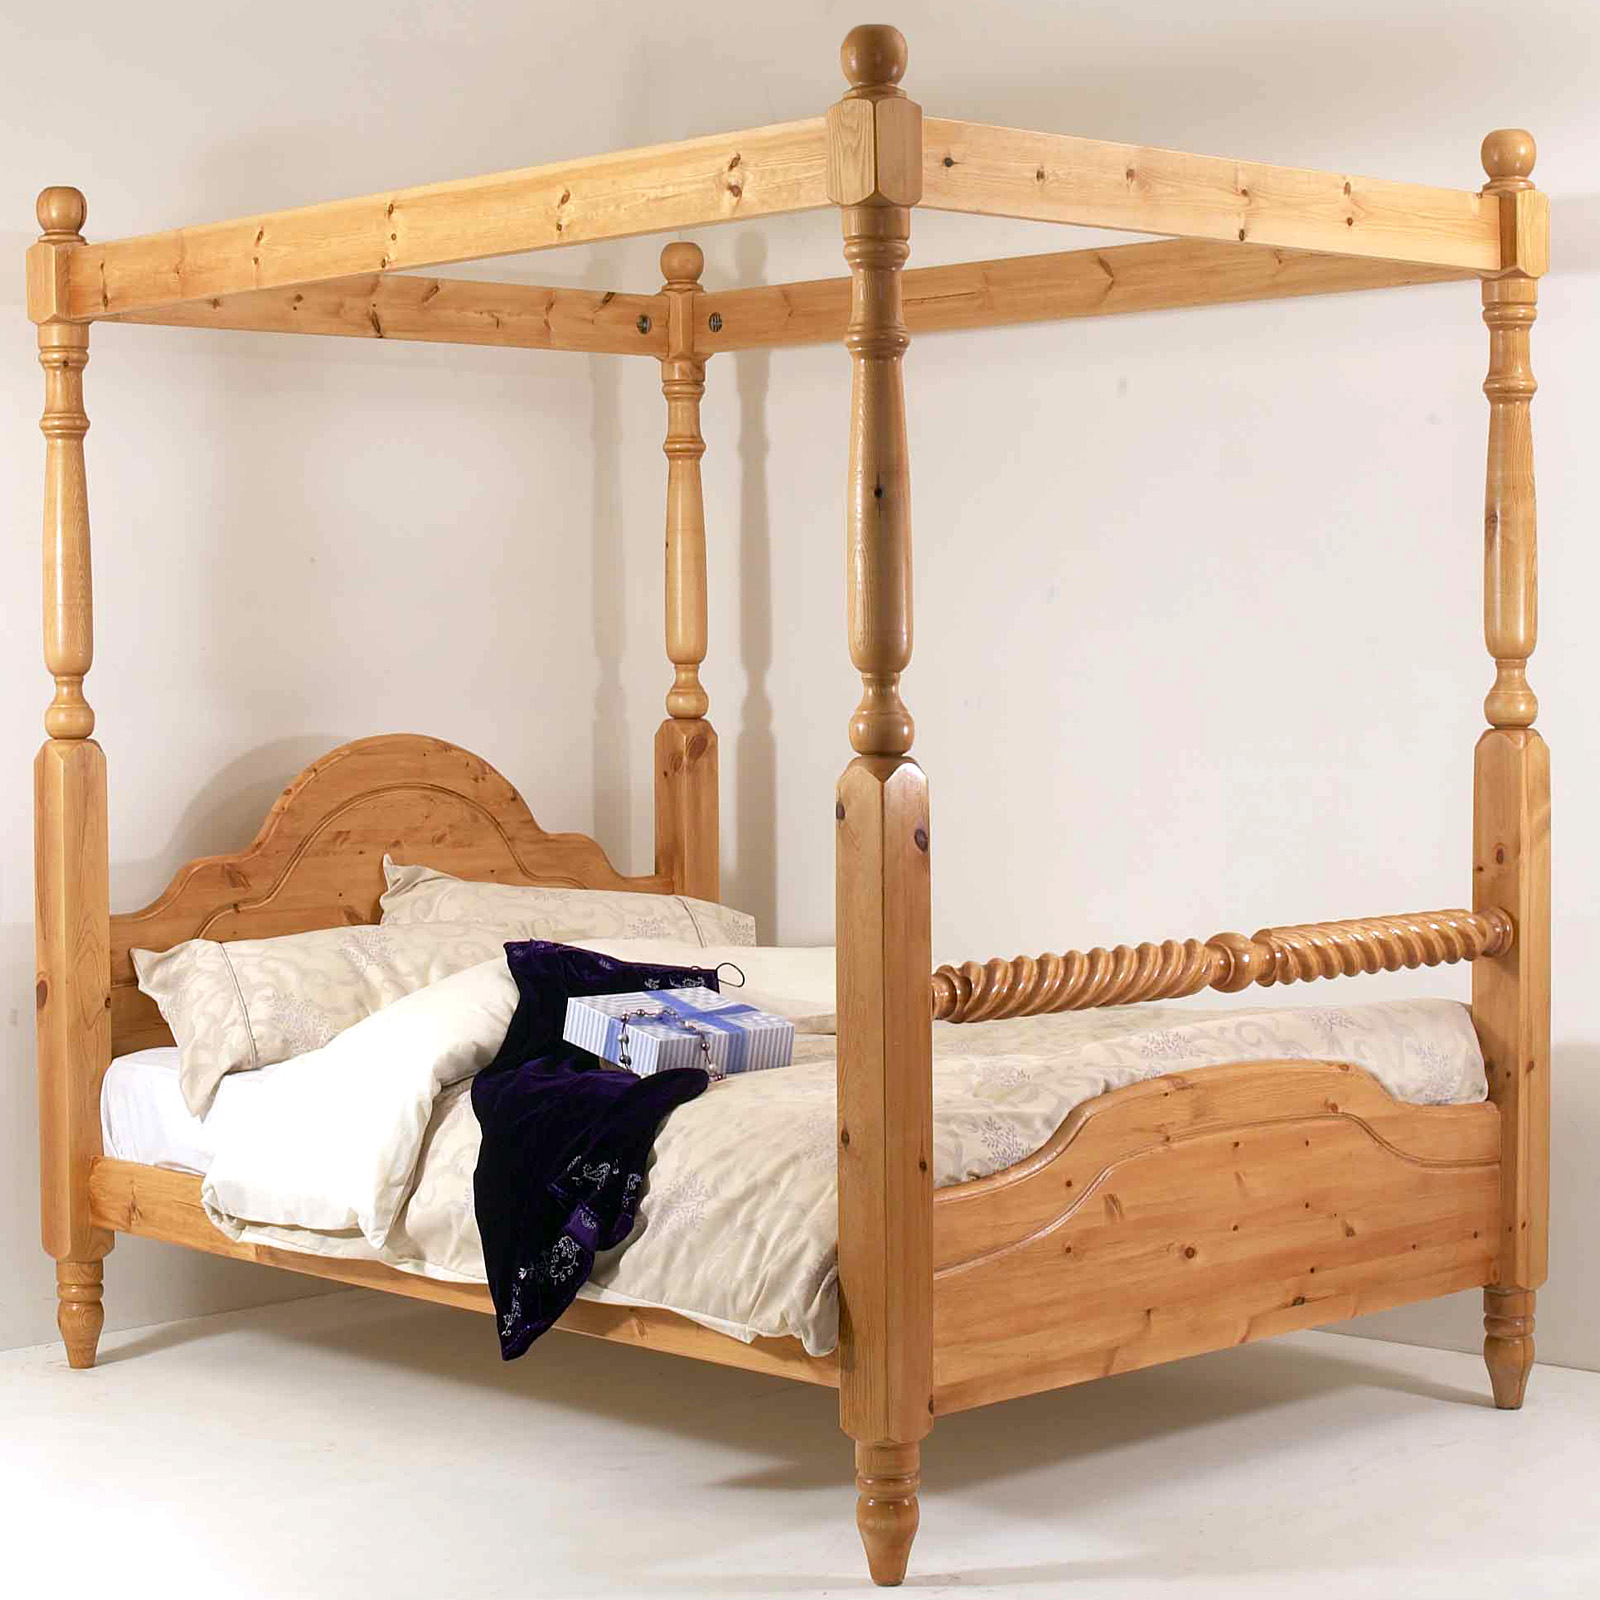 5ft Classic Rail Four Poster Bed King, King Size Poster Bed Frame